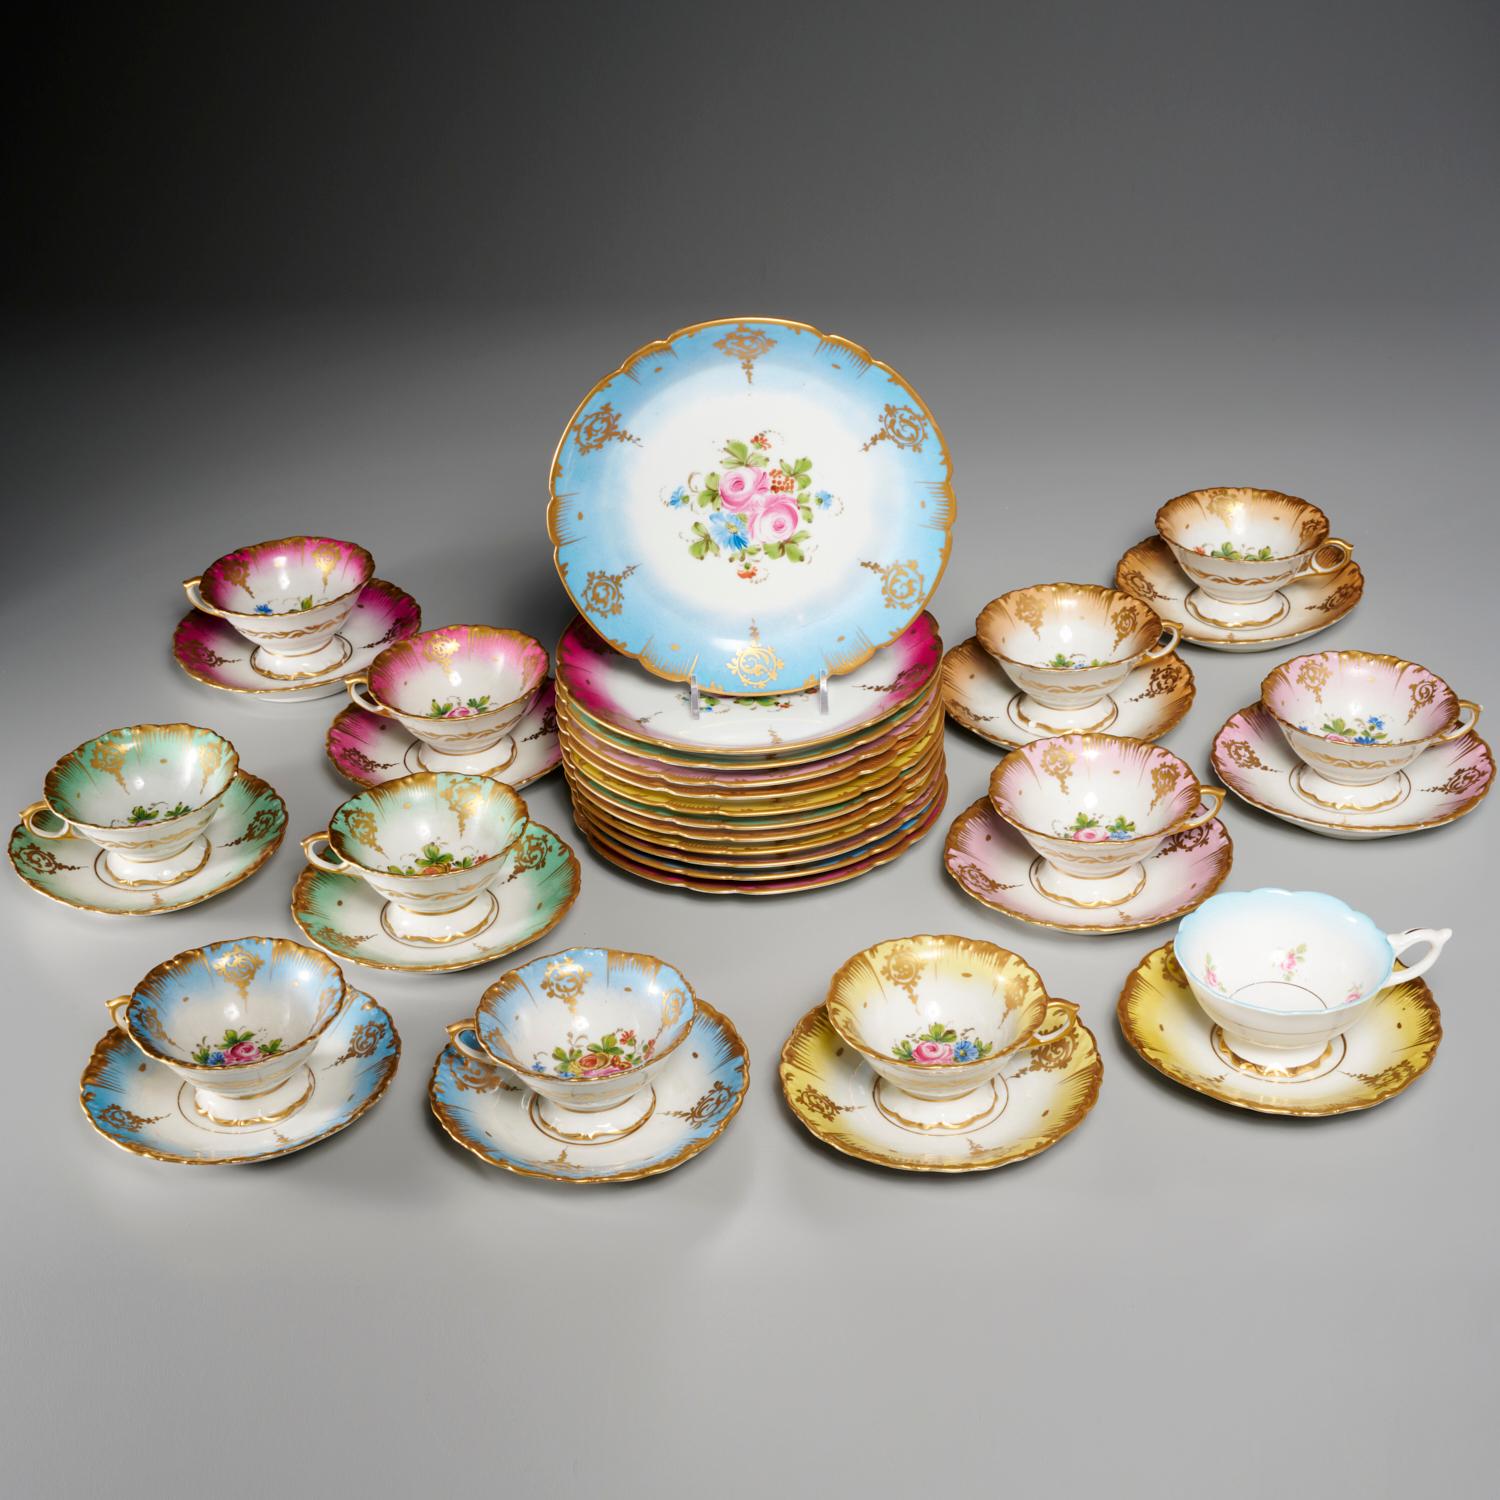 Sèvres Style Gilt and Painted Porcelain Dessert Service for 12 For Sale 3